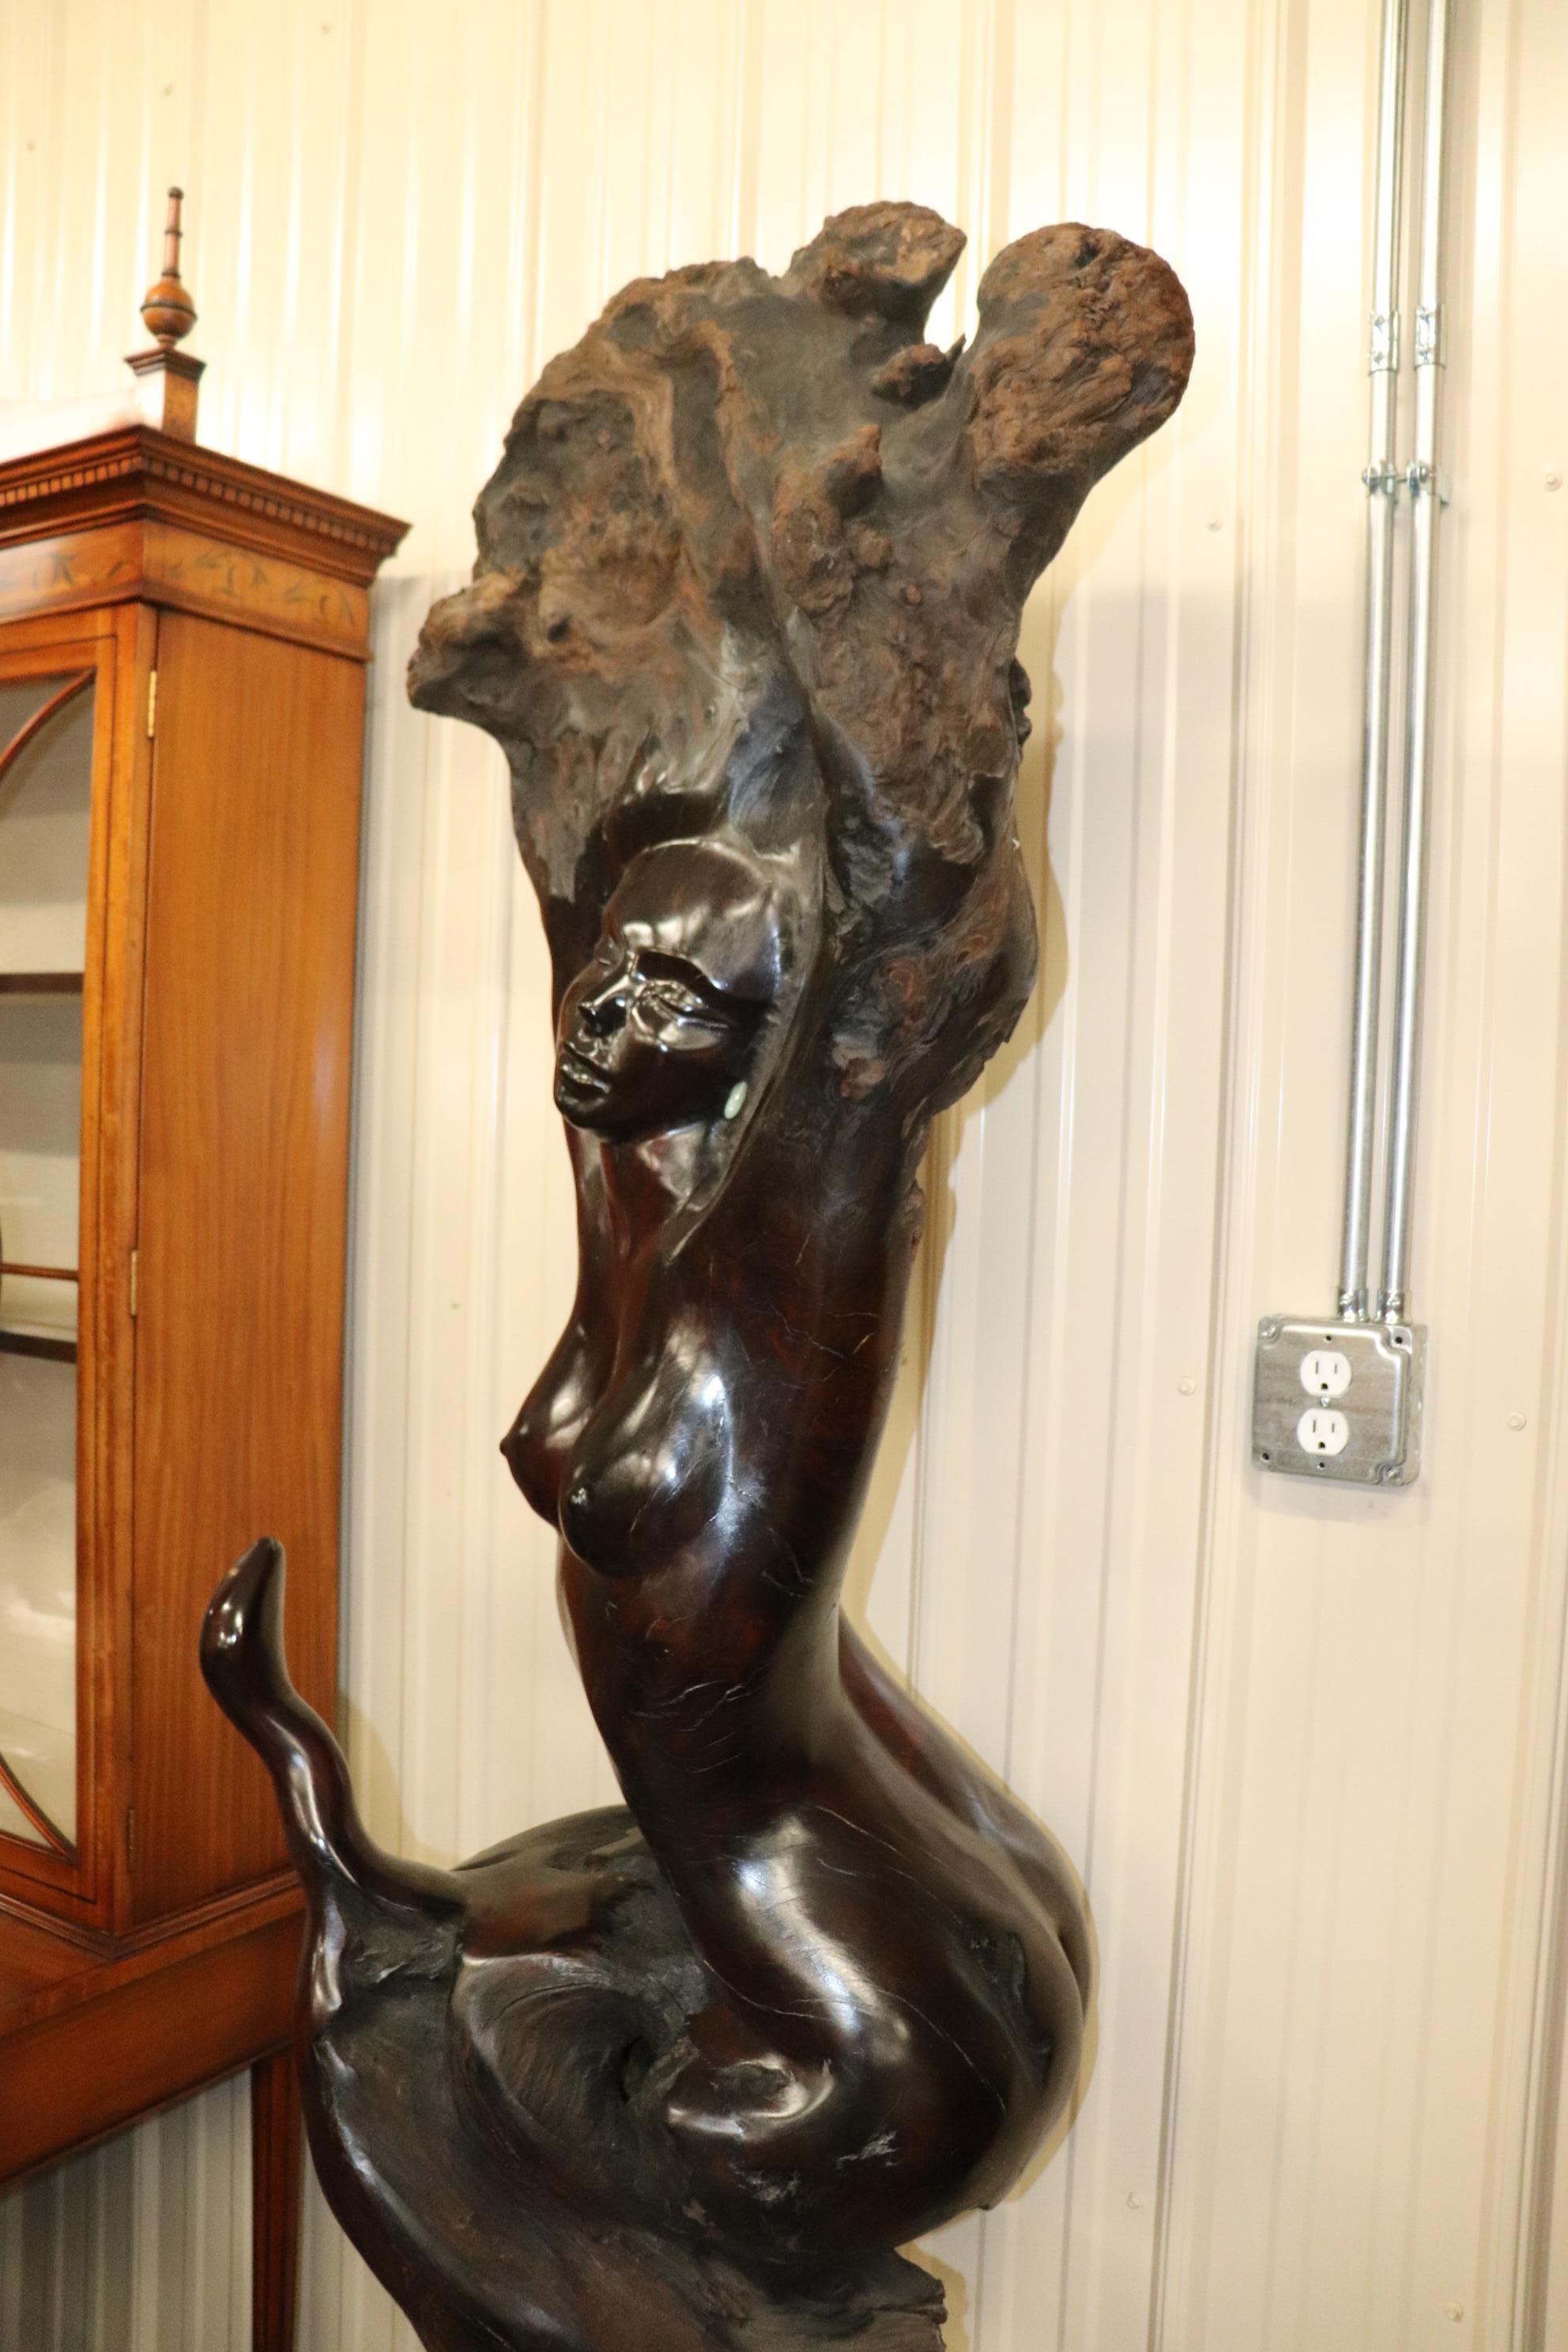 This is a very large and heavy beautifully carved nude figure of a women and a snake facing her appearing to be charmed or gazing at her. The carving is very tall at approximately 83 tall x 21 wide x 20 deep and is just beautifully done. The